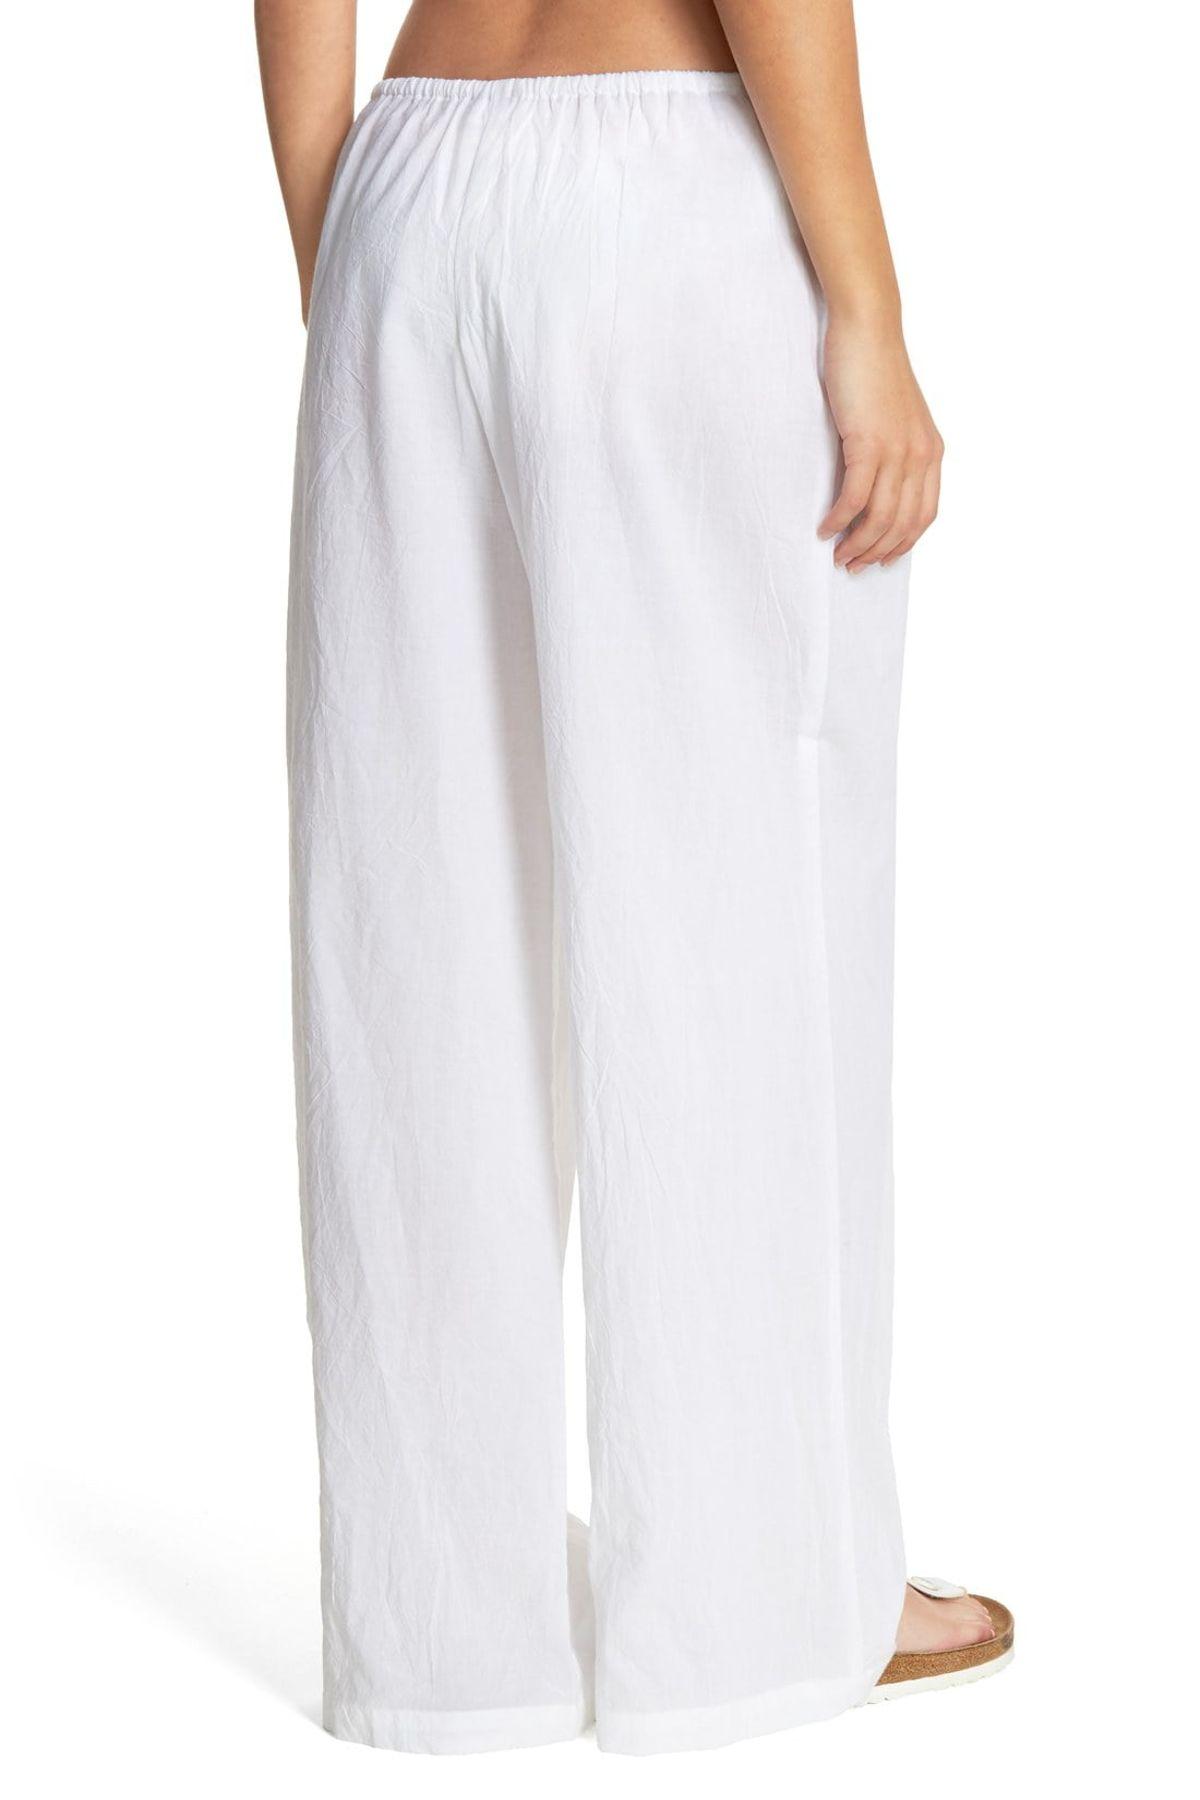 Tommy Bahama Cover-up Pants in White - Lyst